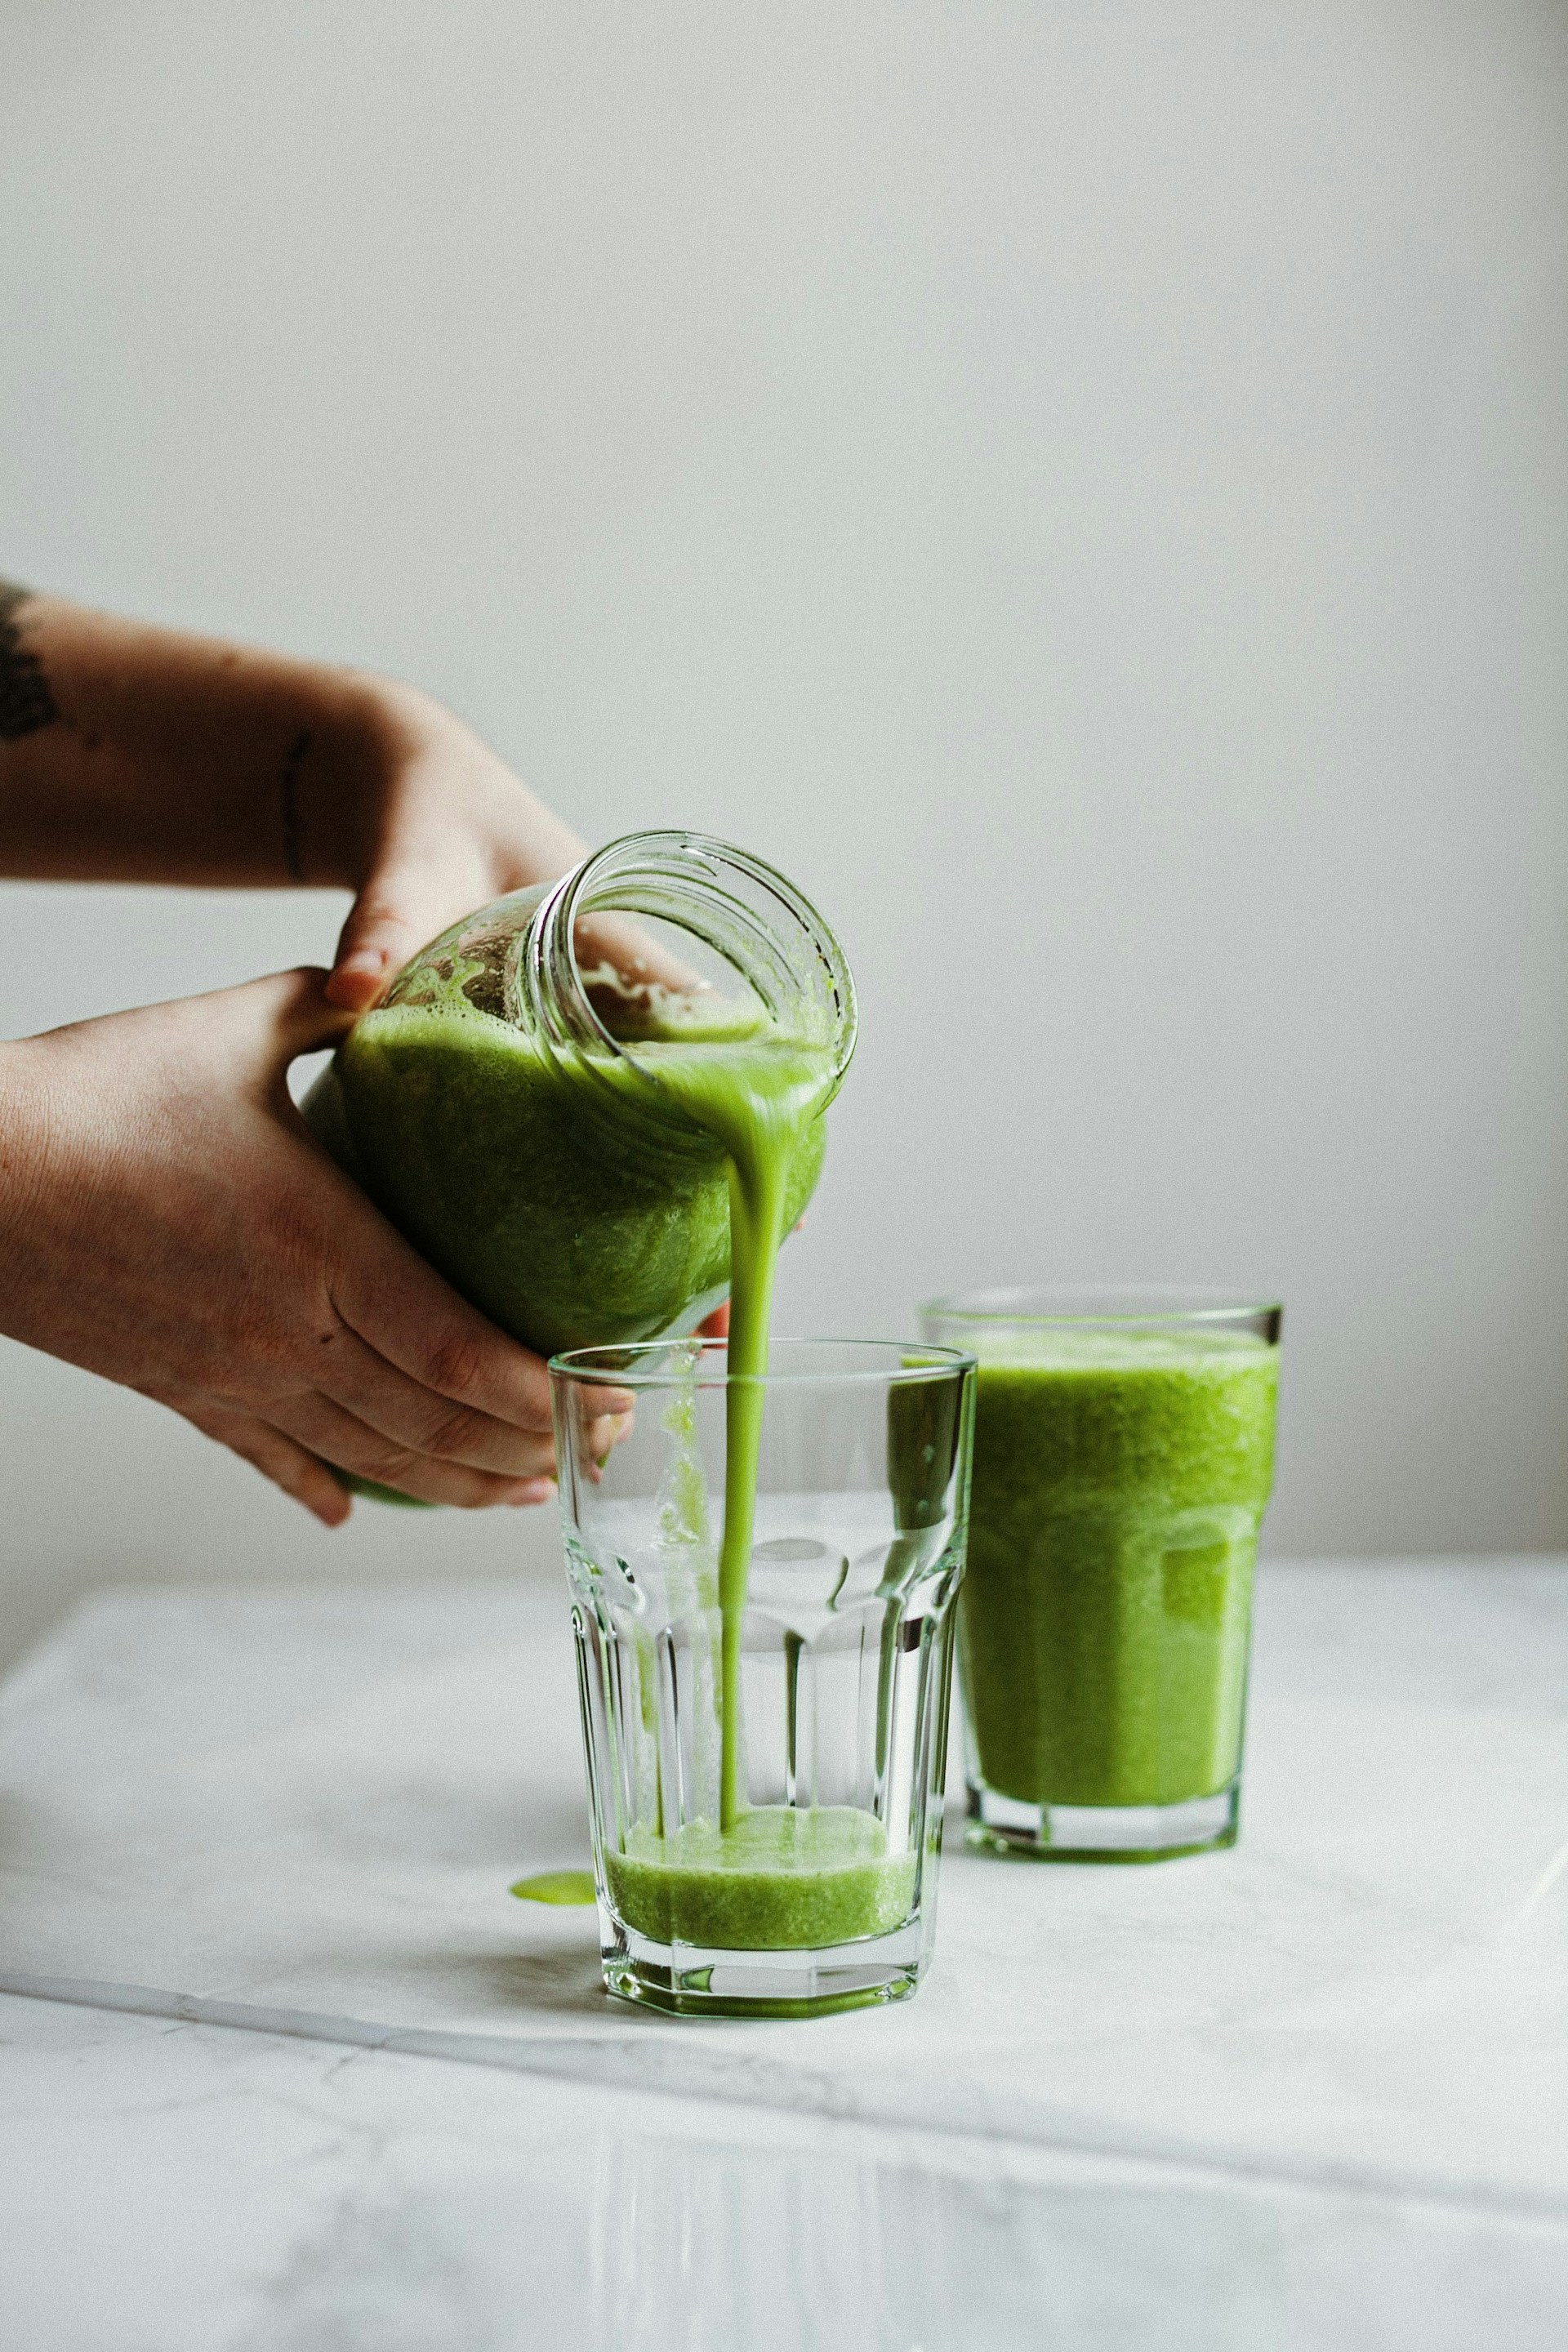 close up of someone hands pouring a green drink celery juice into a cup on a white table